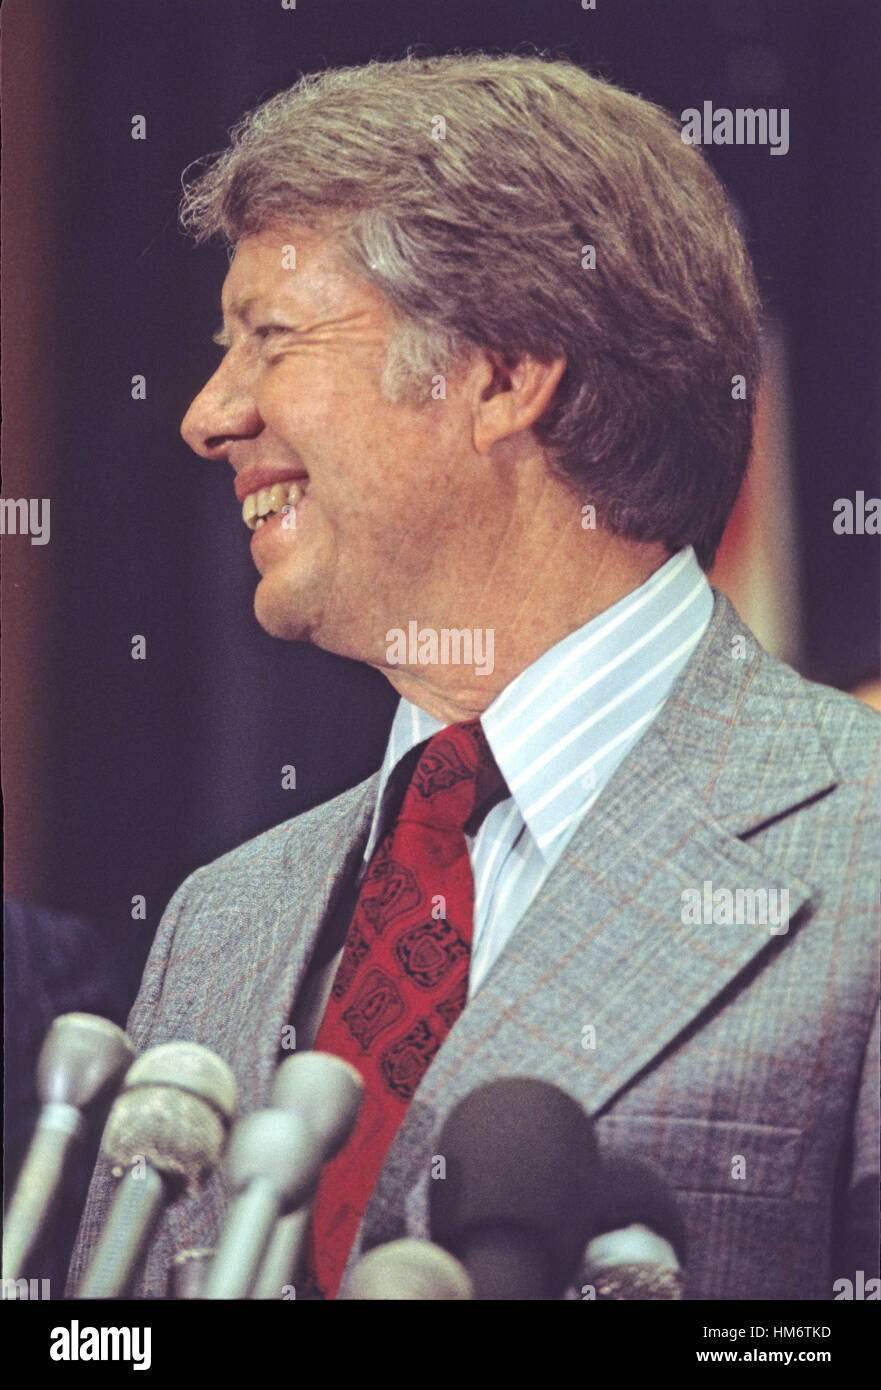 Governor Jimmy Carter (Democrat of Georgia), a candidate for the 1976 Democratic nomination for President of the United States, speaks before US House members and employees in the Rayburn House Office Building in Washington, DC on May 15, 1976. Stock Photo